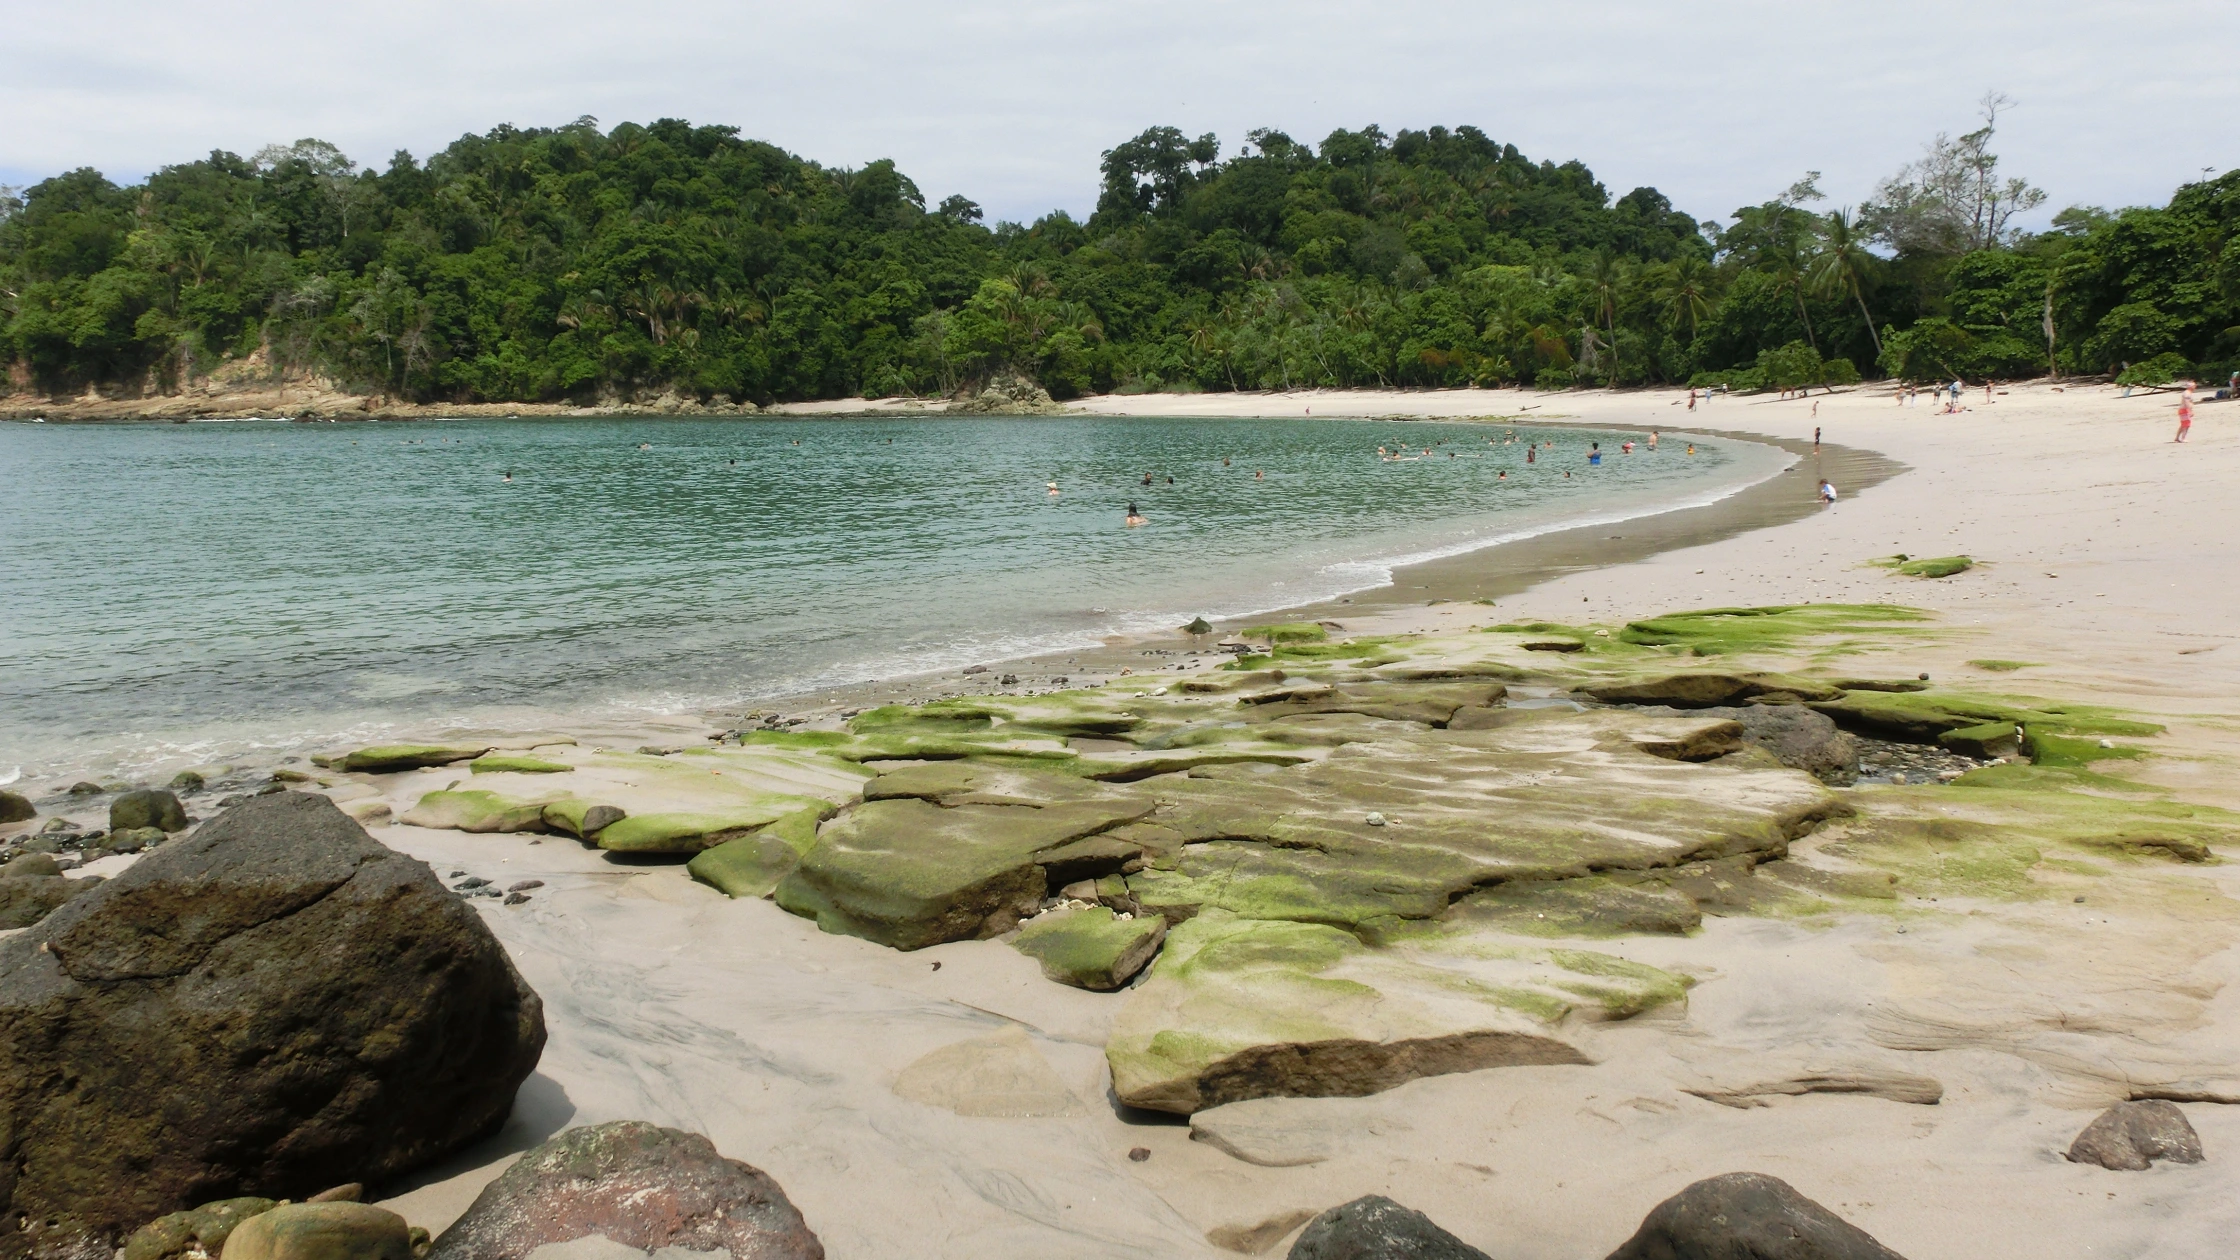 A DAY IN MANUEL ANTONIO NATIONAL PARK